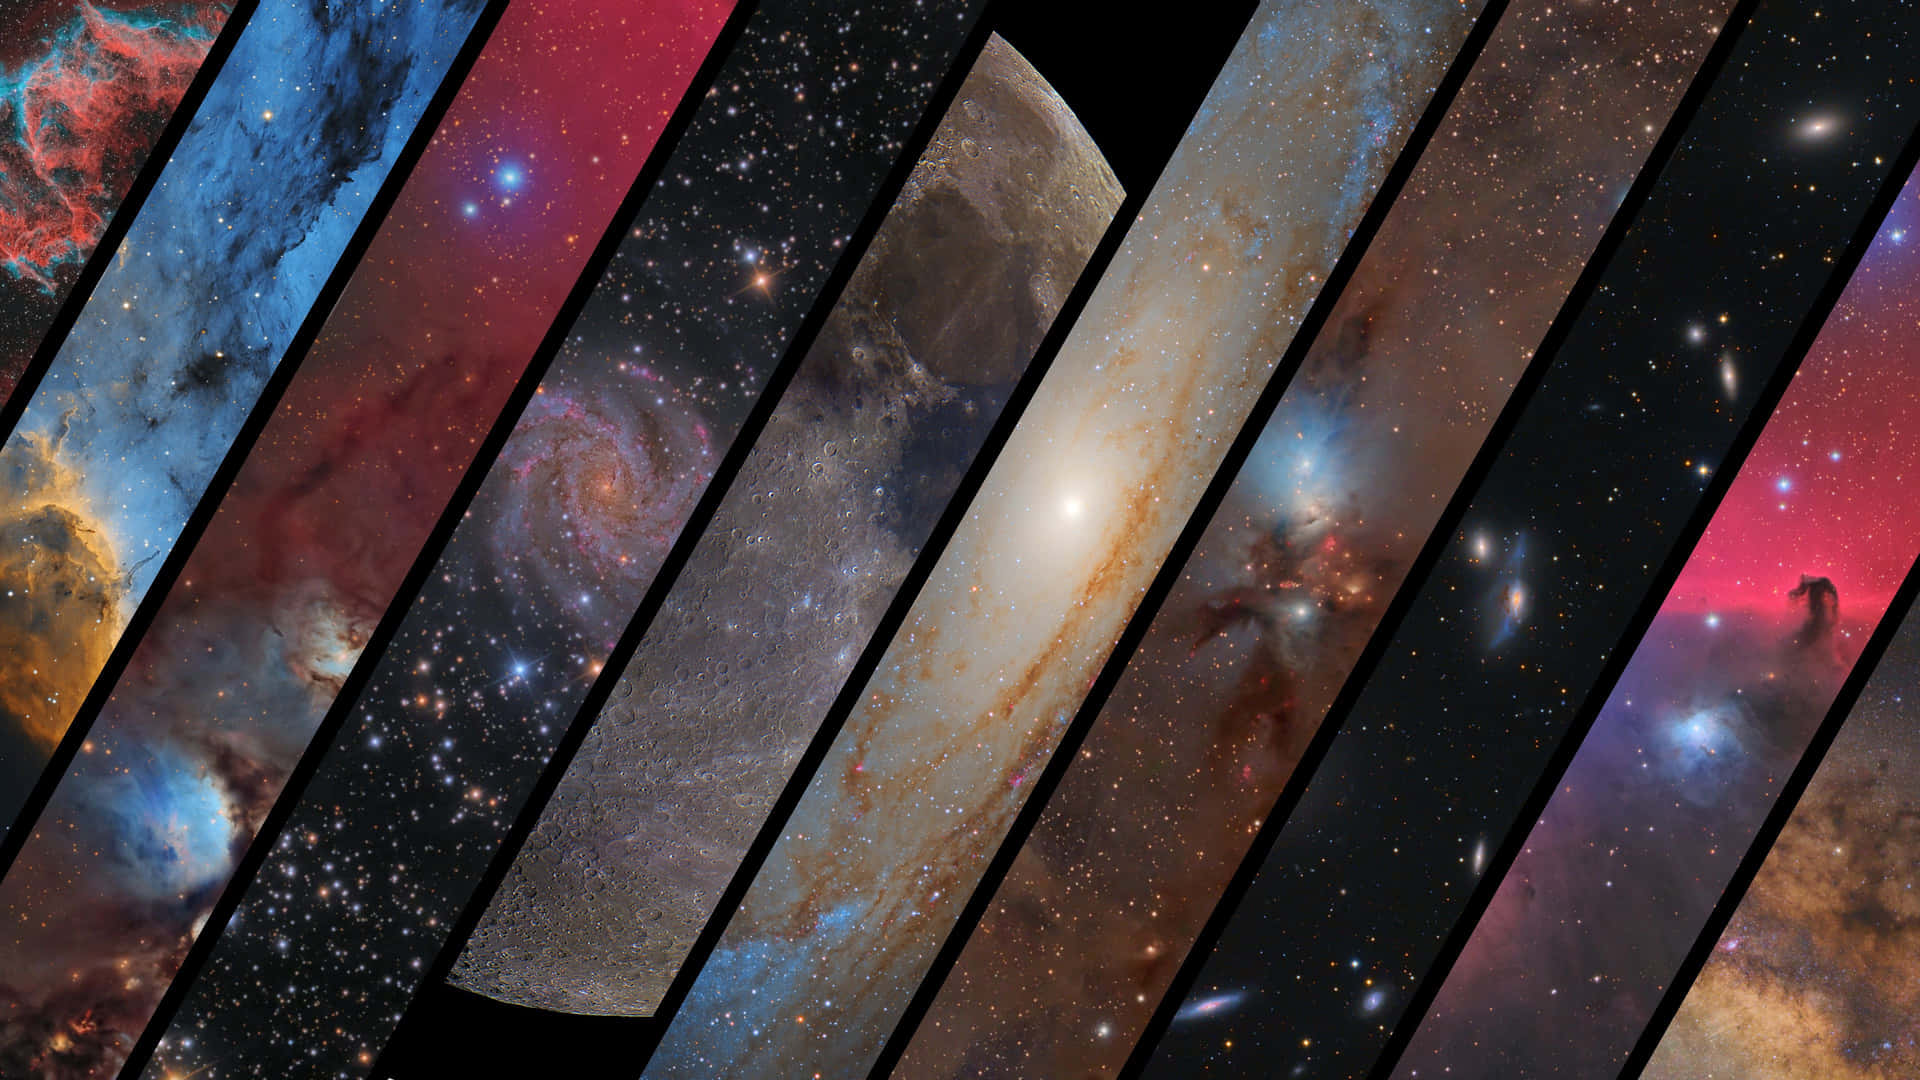 A mesmerizing view of the universe with various celestial bodies and vibrant cosmic dust. Wallpaper